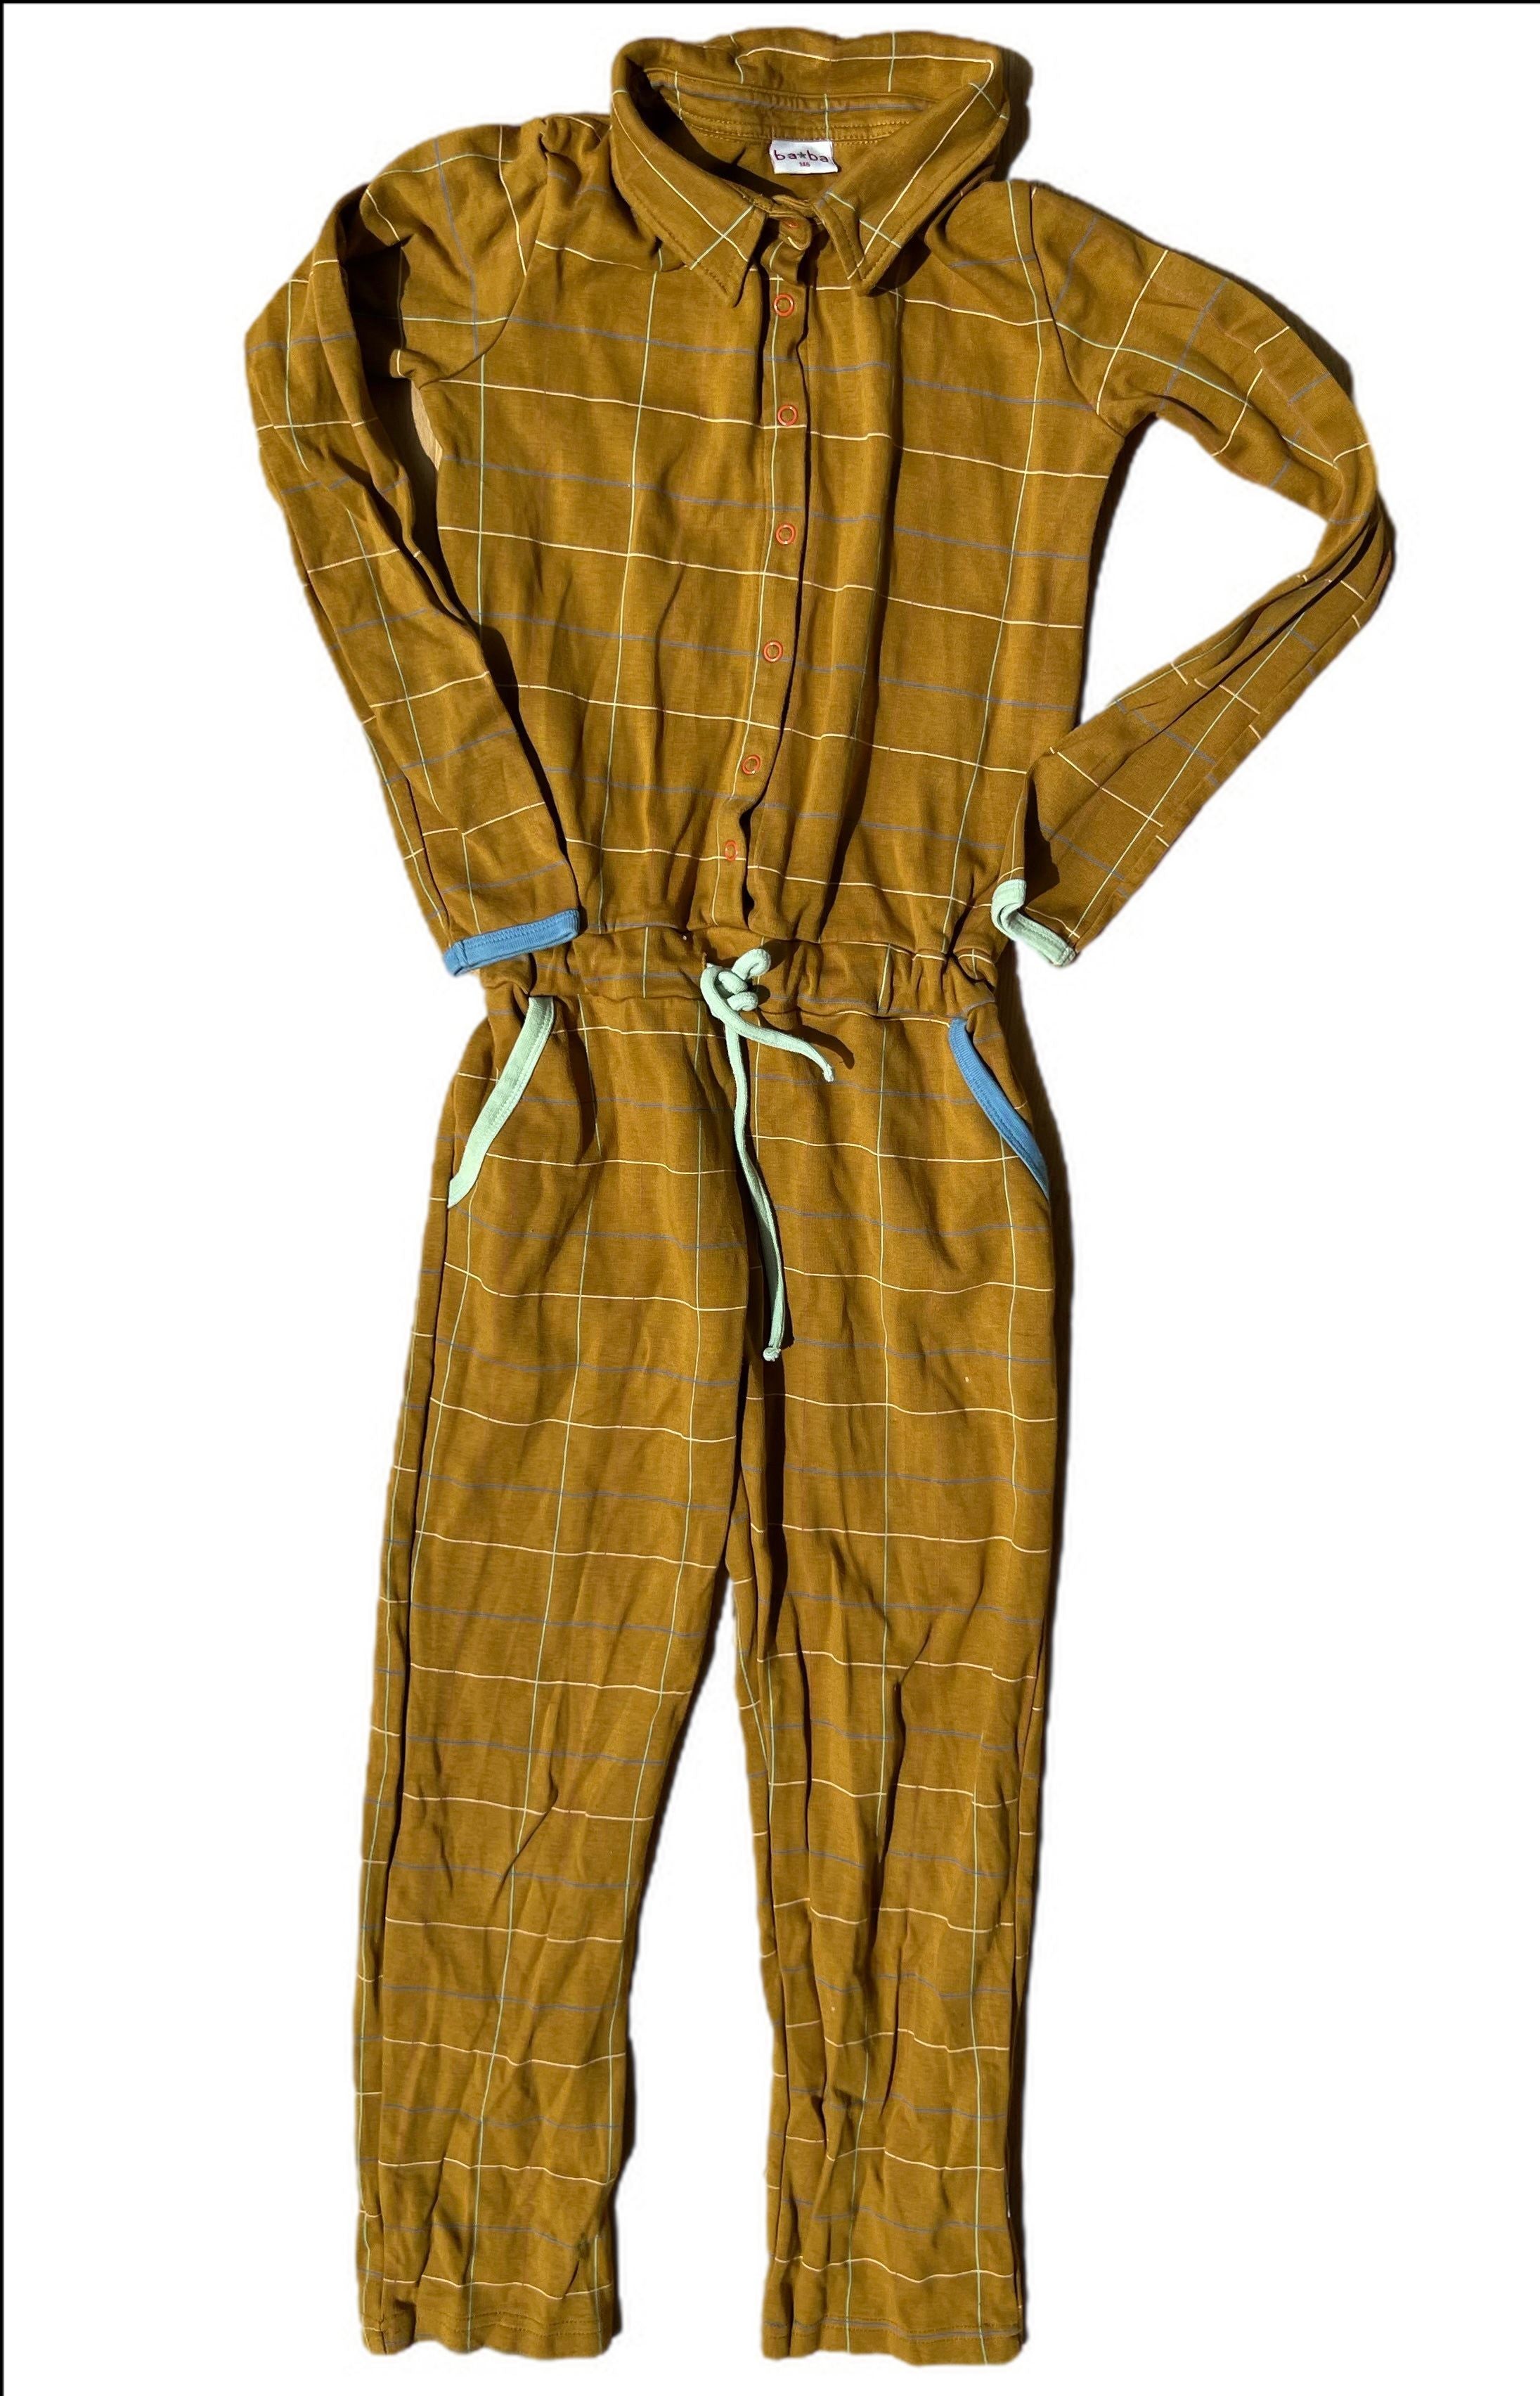 Large Check Print Jumpsuit (small fitting)